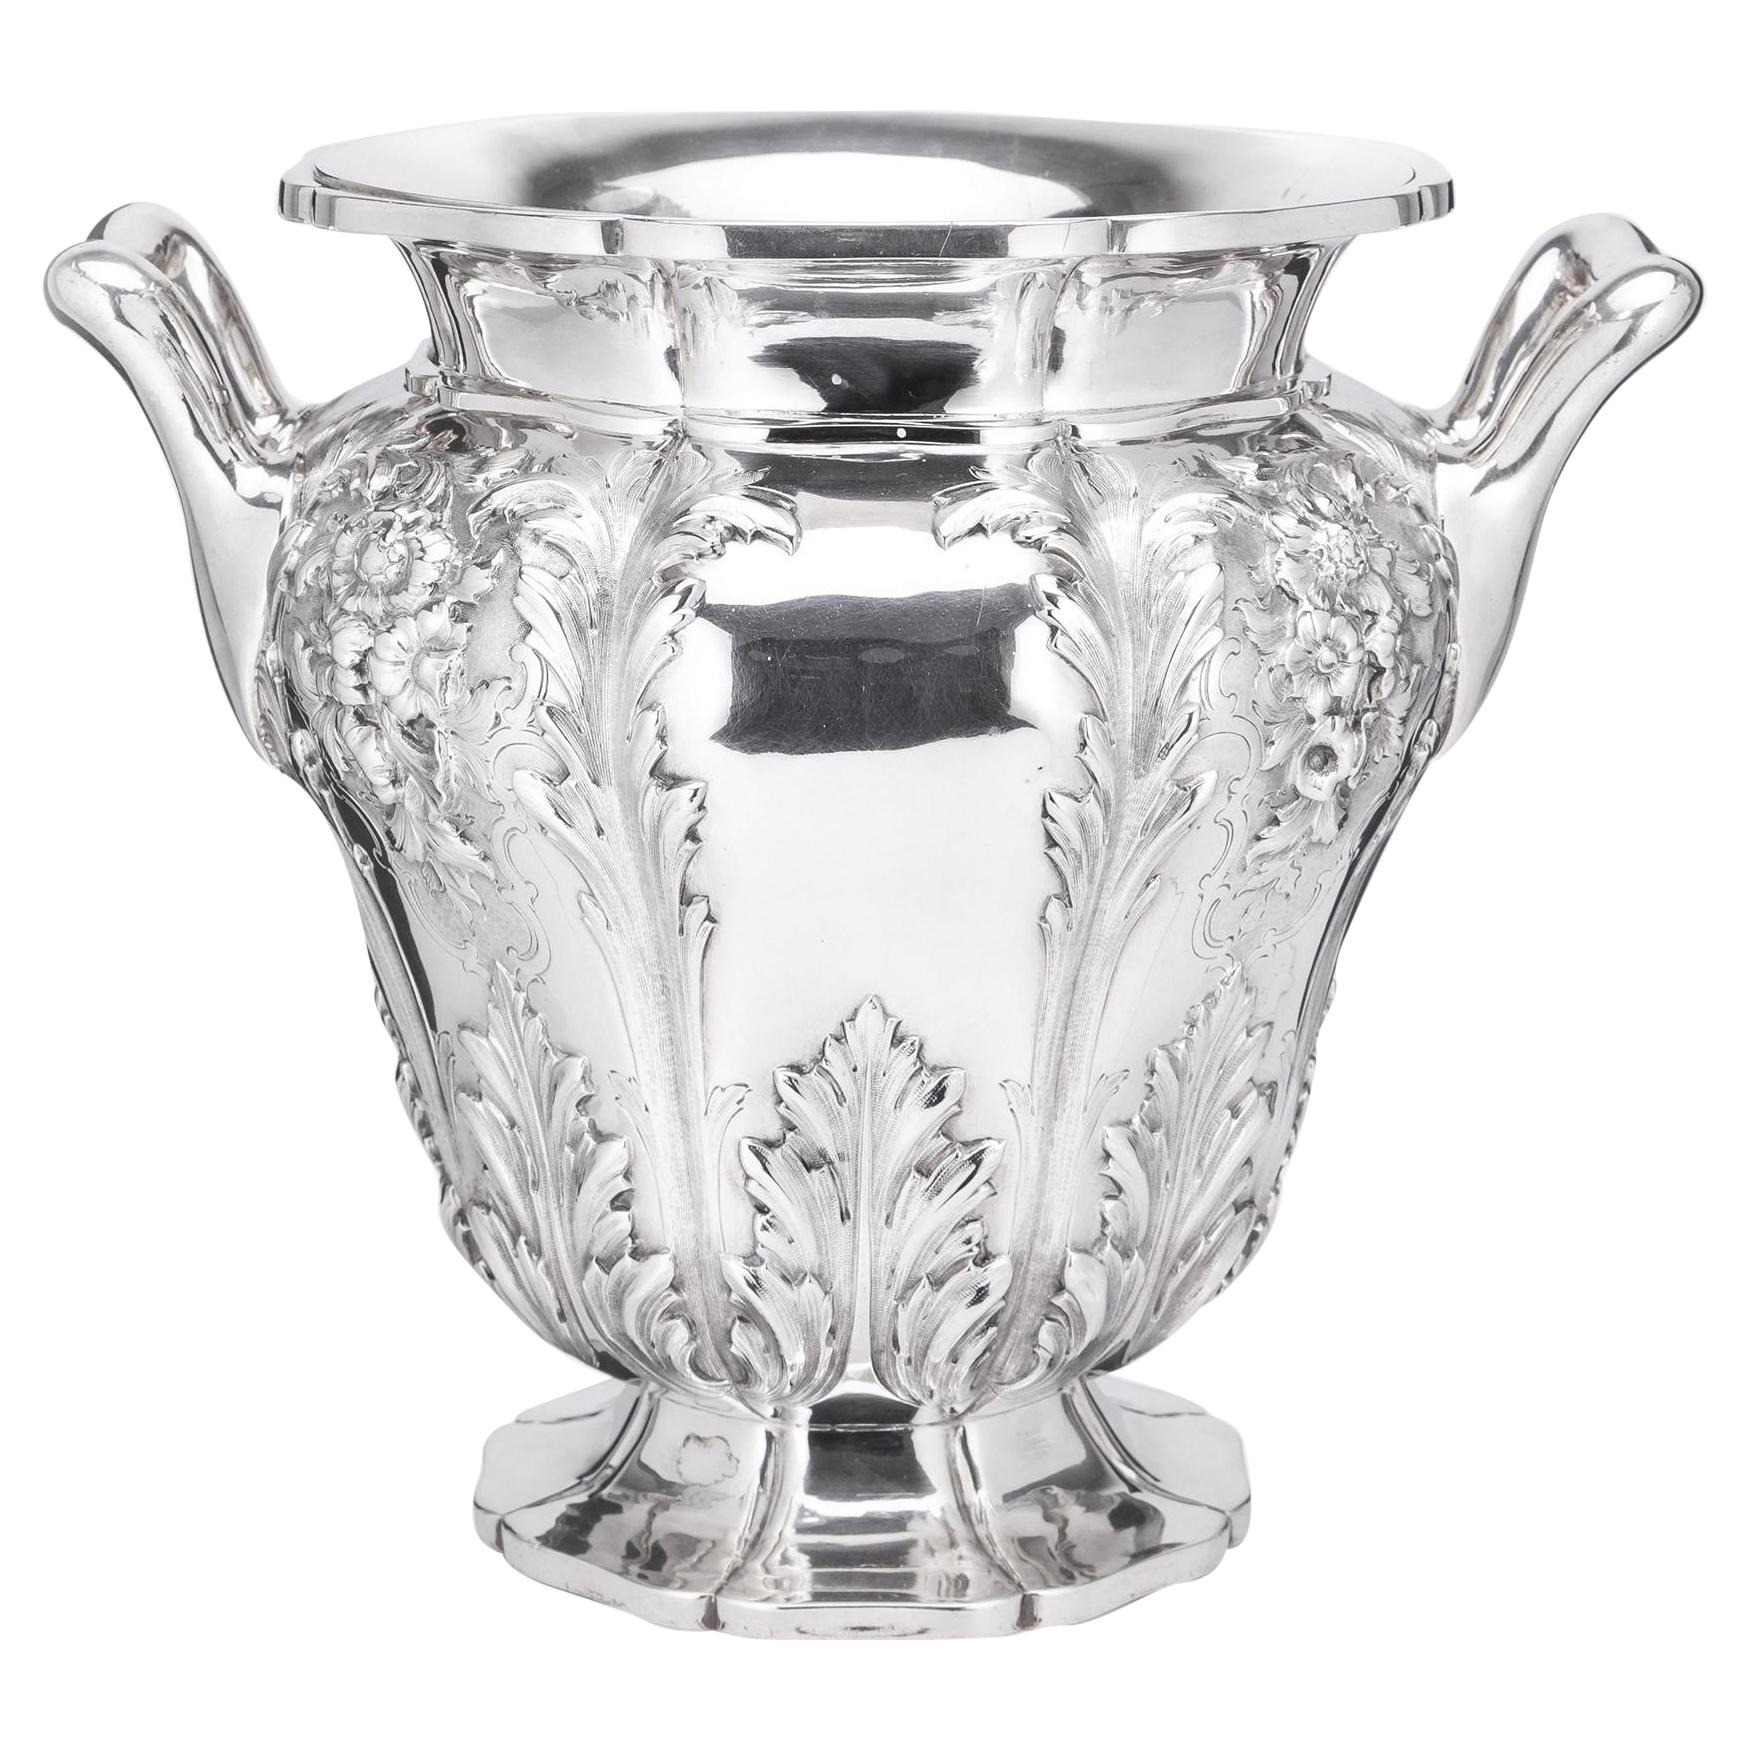 Early Victorian Silver Wine Cooler